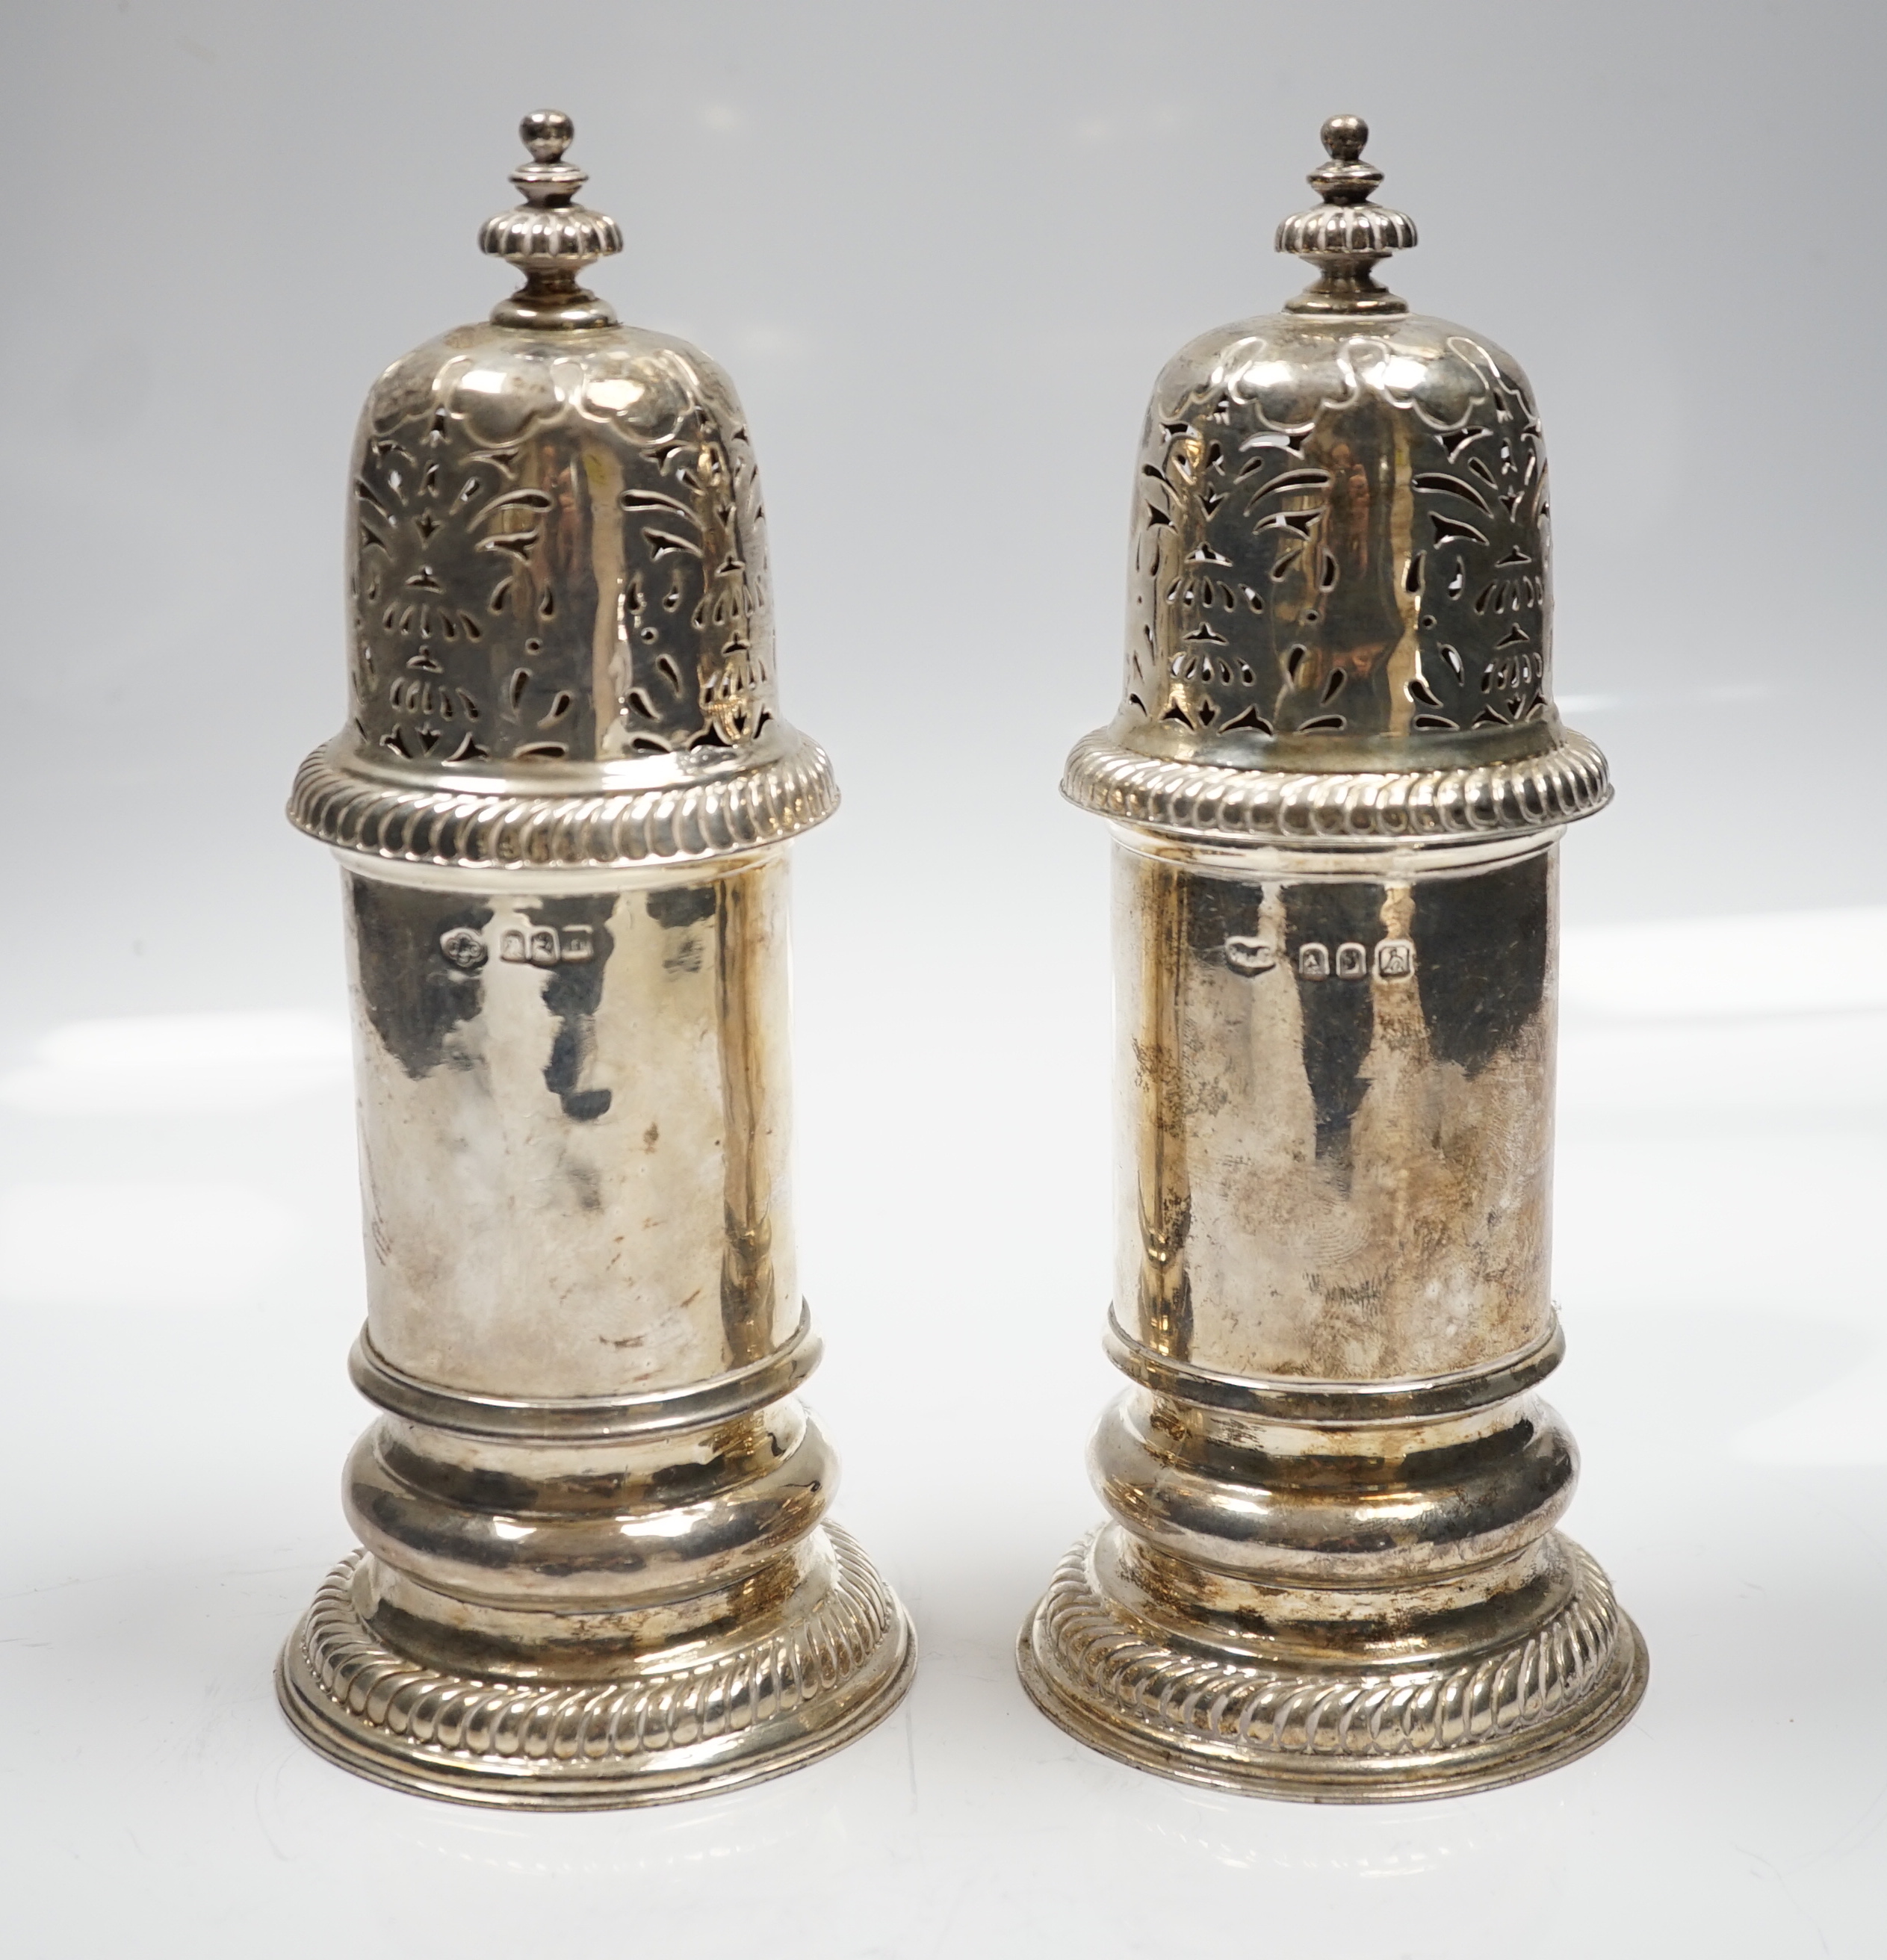 A matched pair of Britannia standard silver lighthouse sugar casters, Carrington & Co, London, 1903 and Wilson & Gill, London, 1963, 20.8cm, 22.6oz.